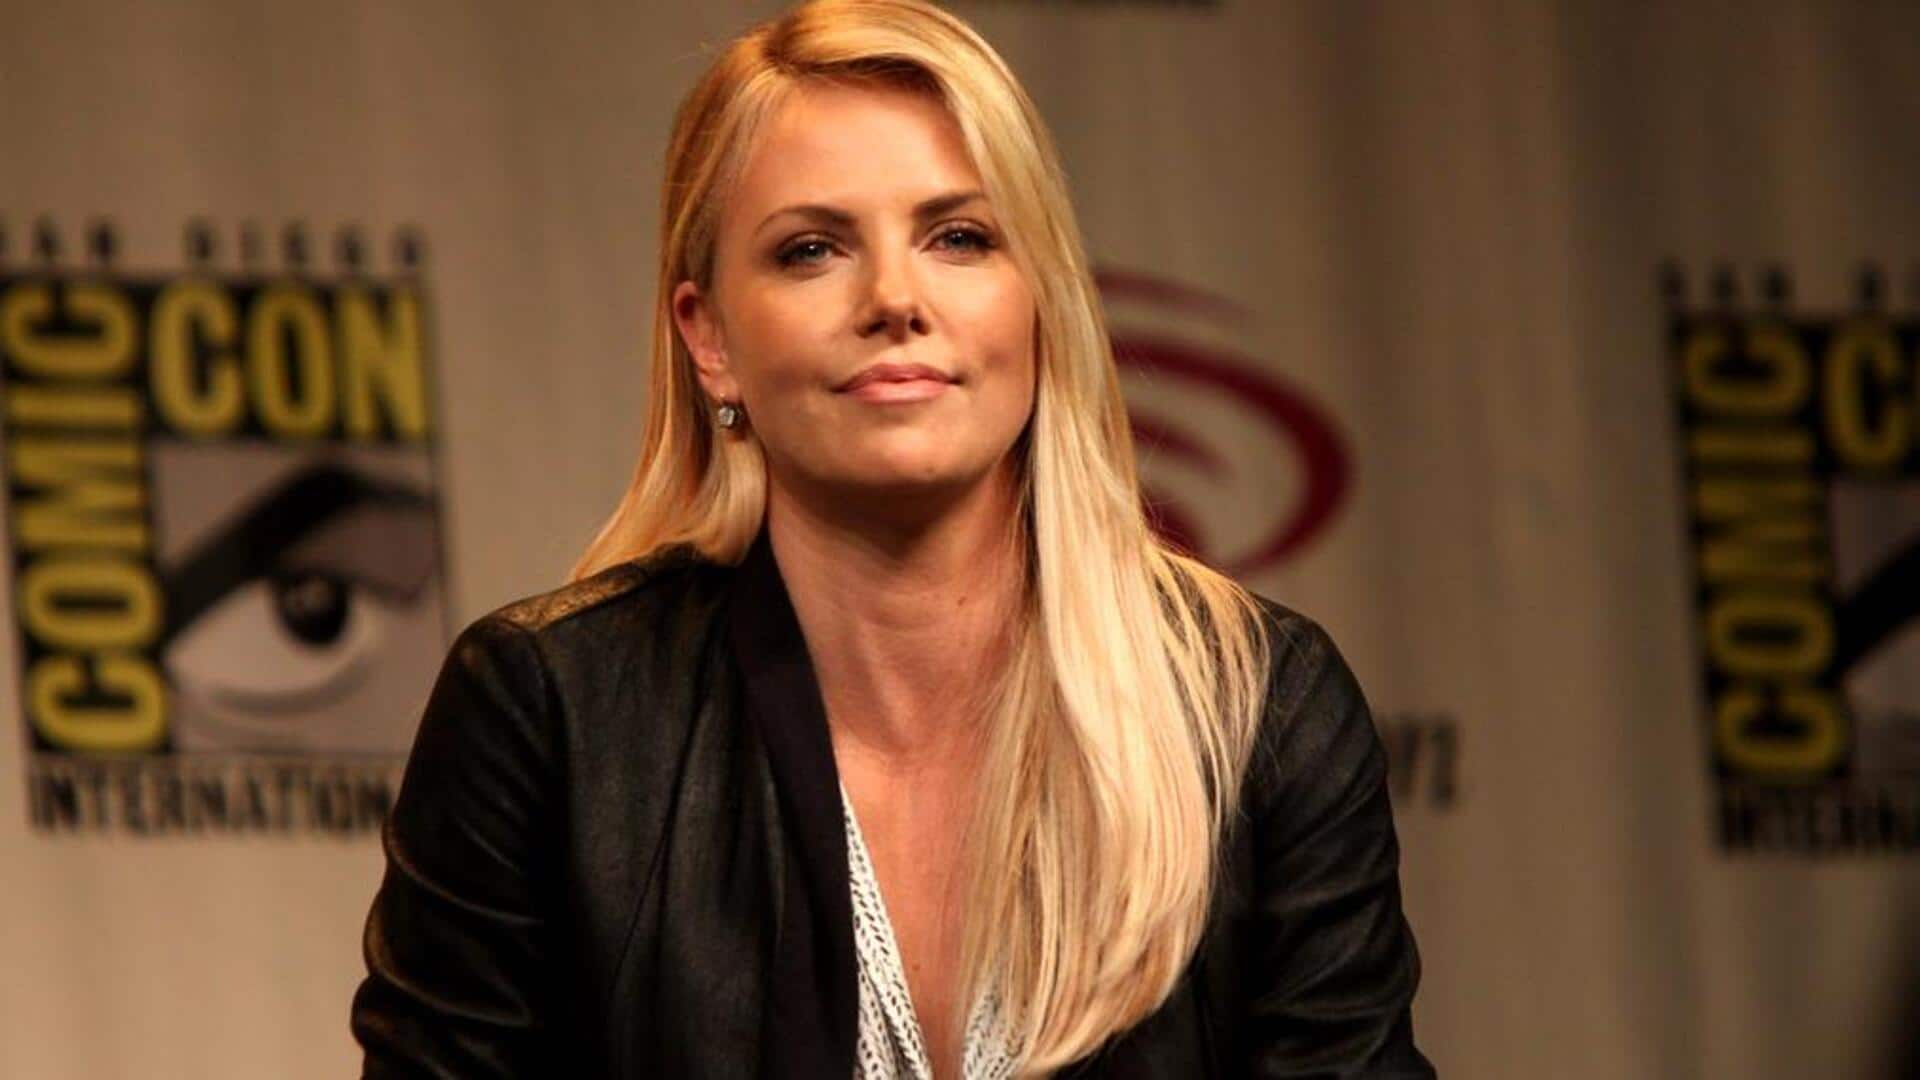 Charlize Theron's most remarkable roles